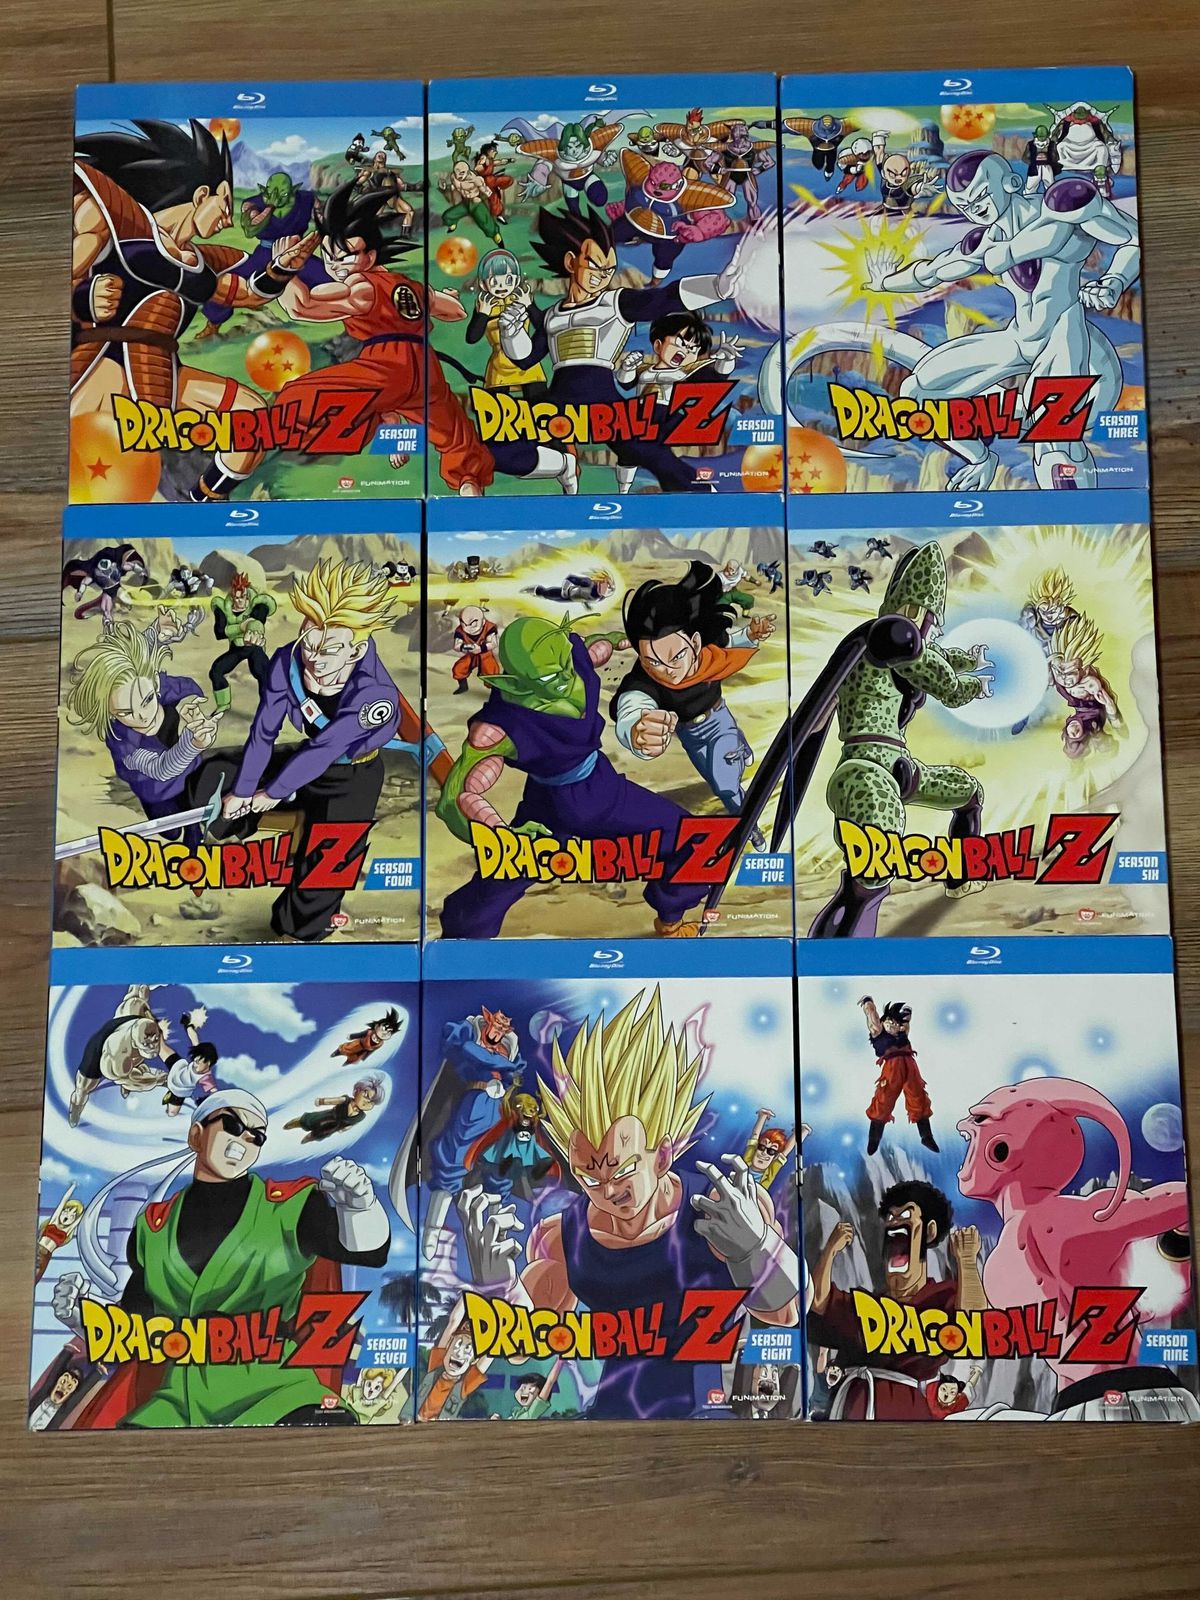 The complete Blu-ray set of Dragonball Z